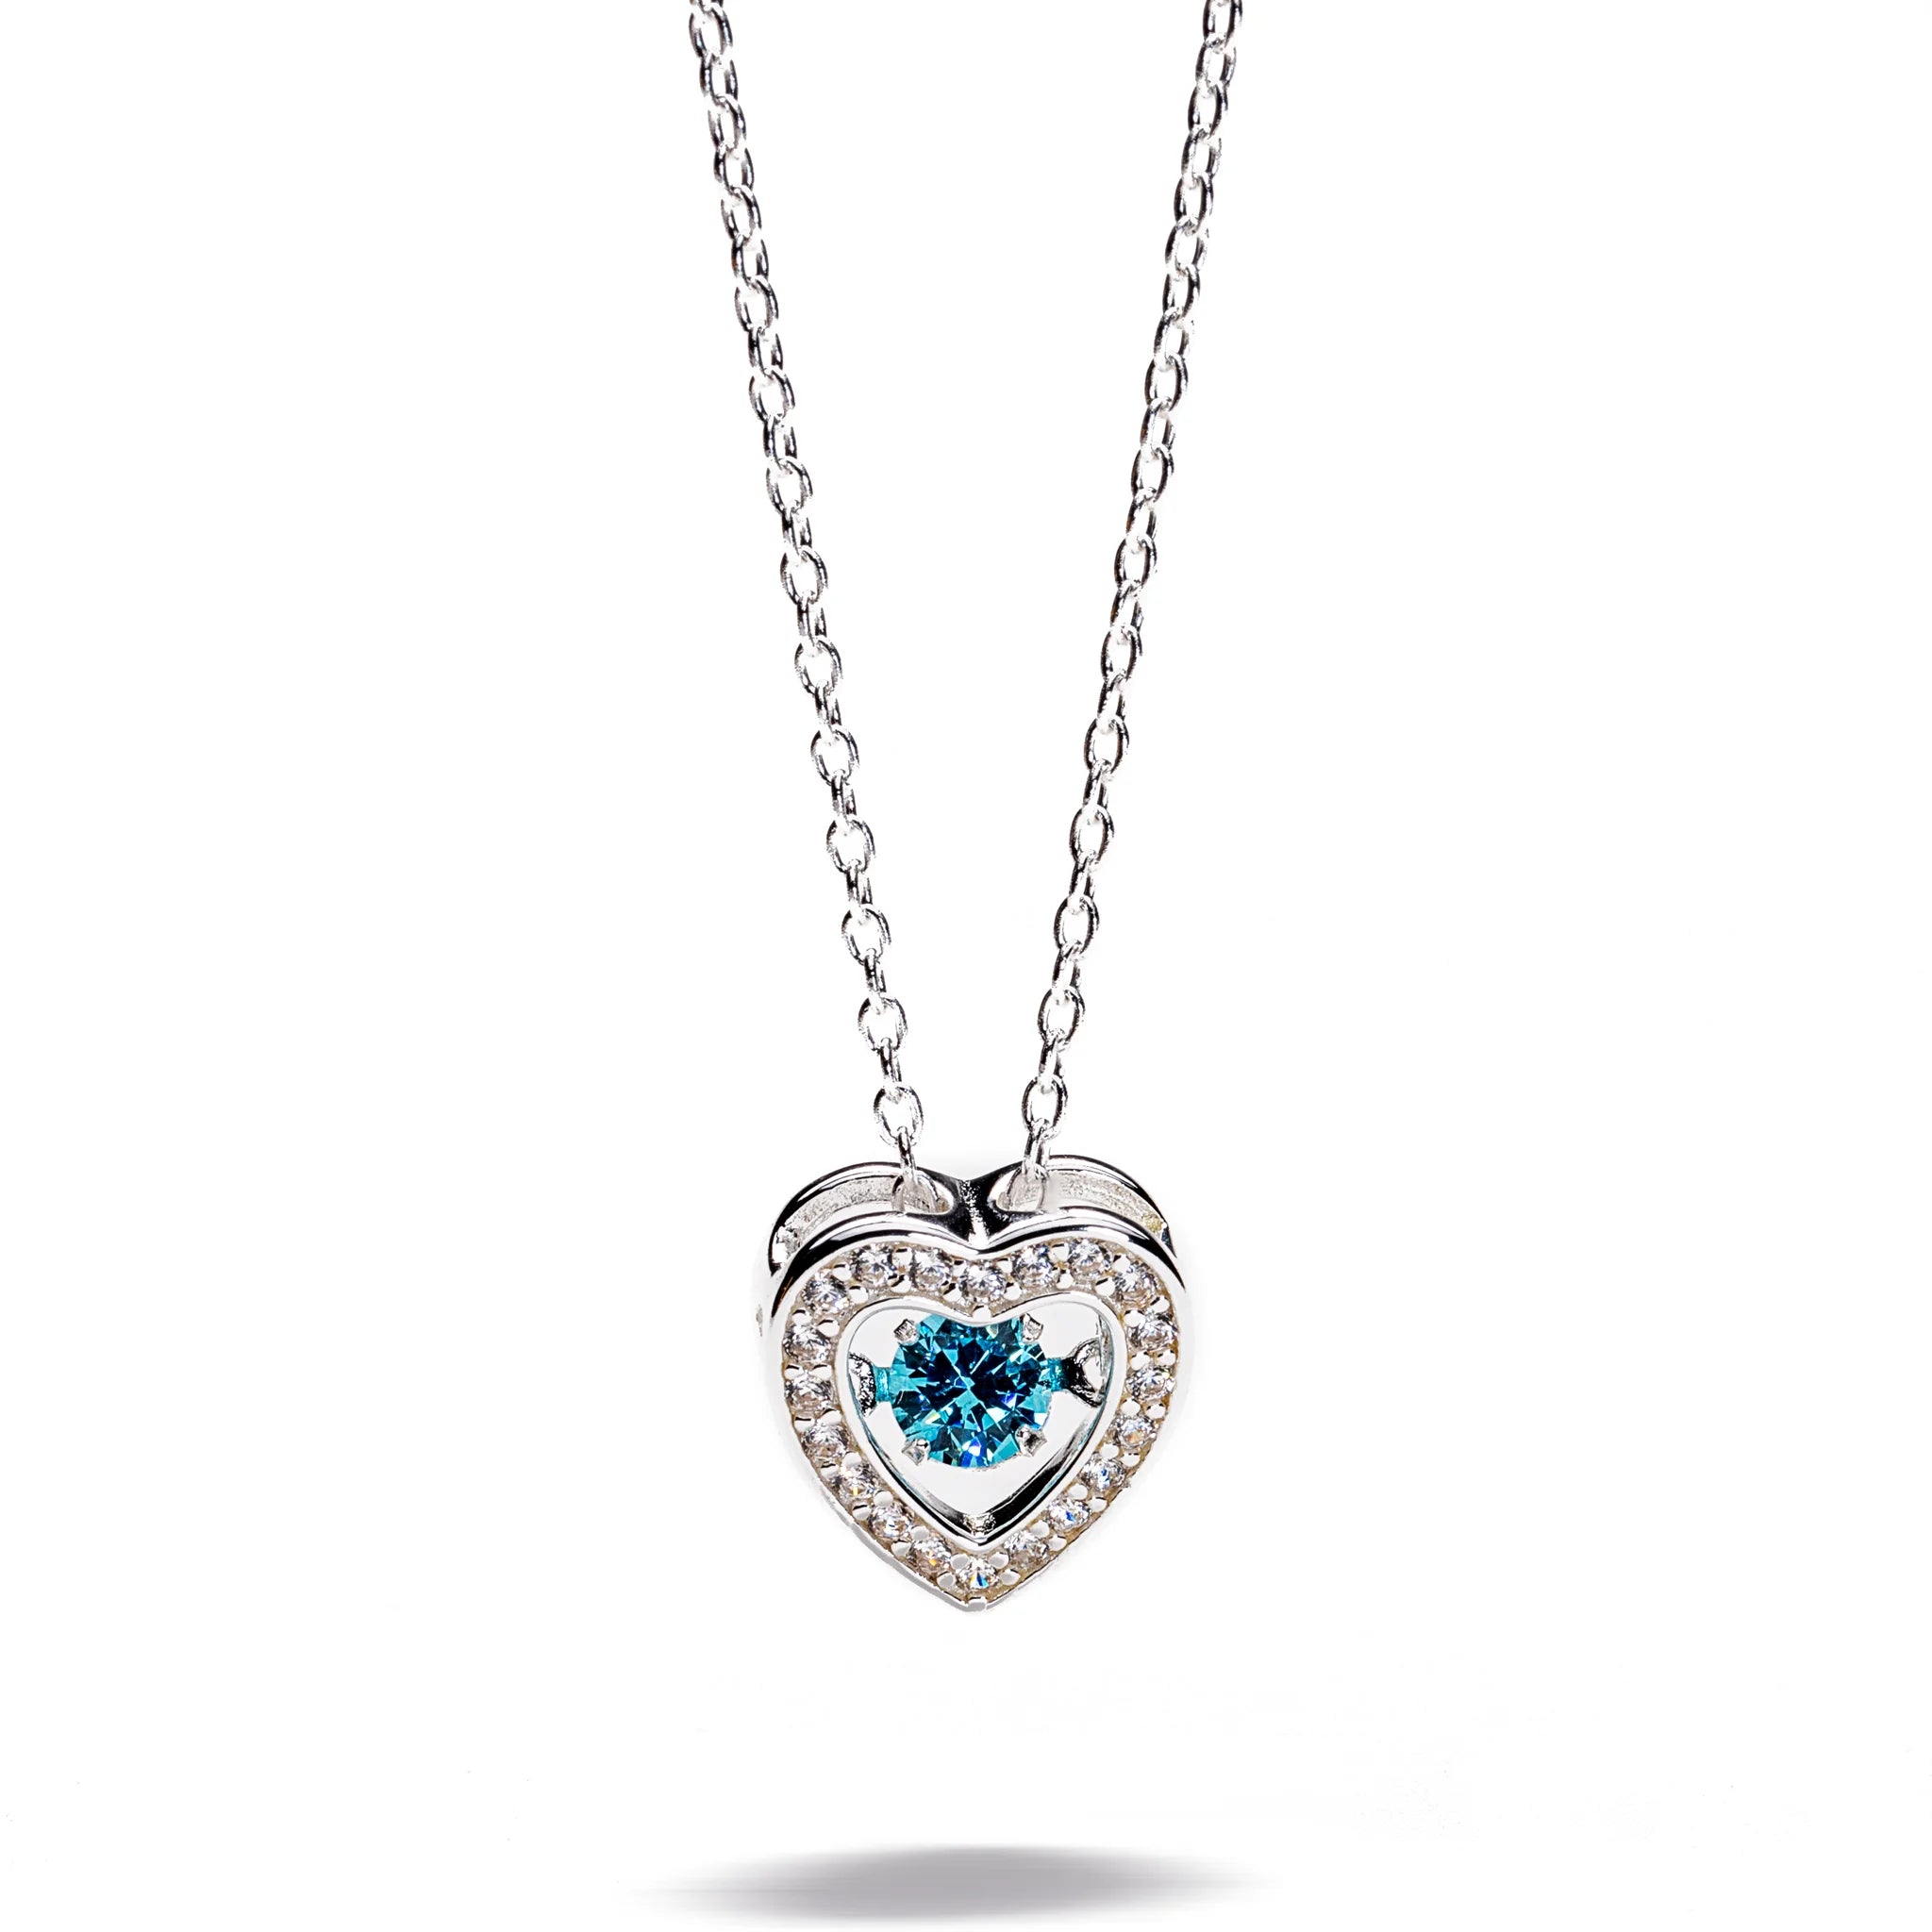 The Lieze Birth Stone Sterling Silver Heart Necklace N303